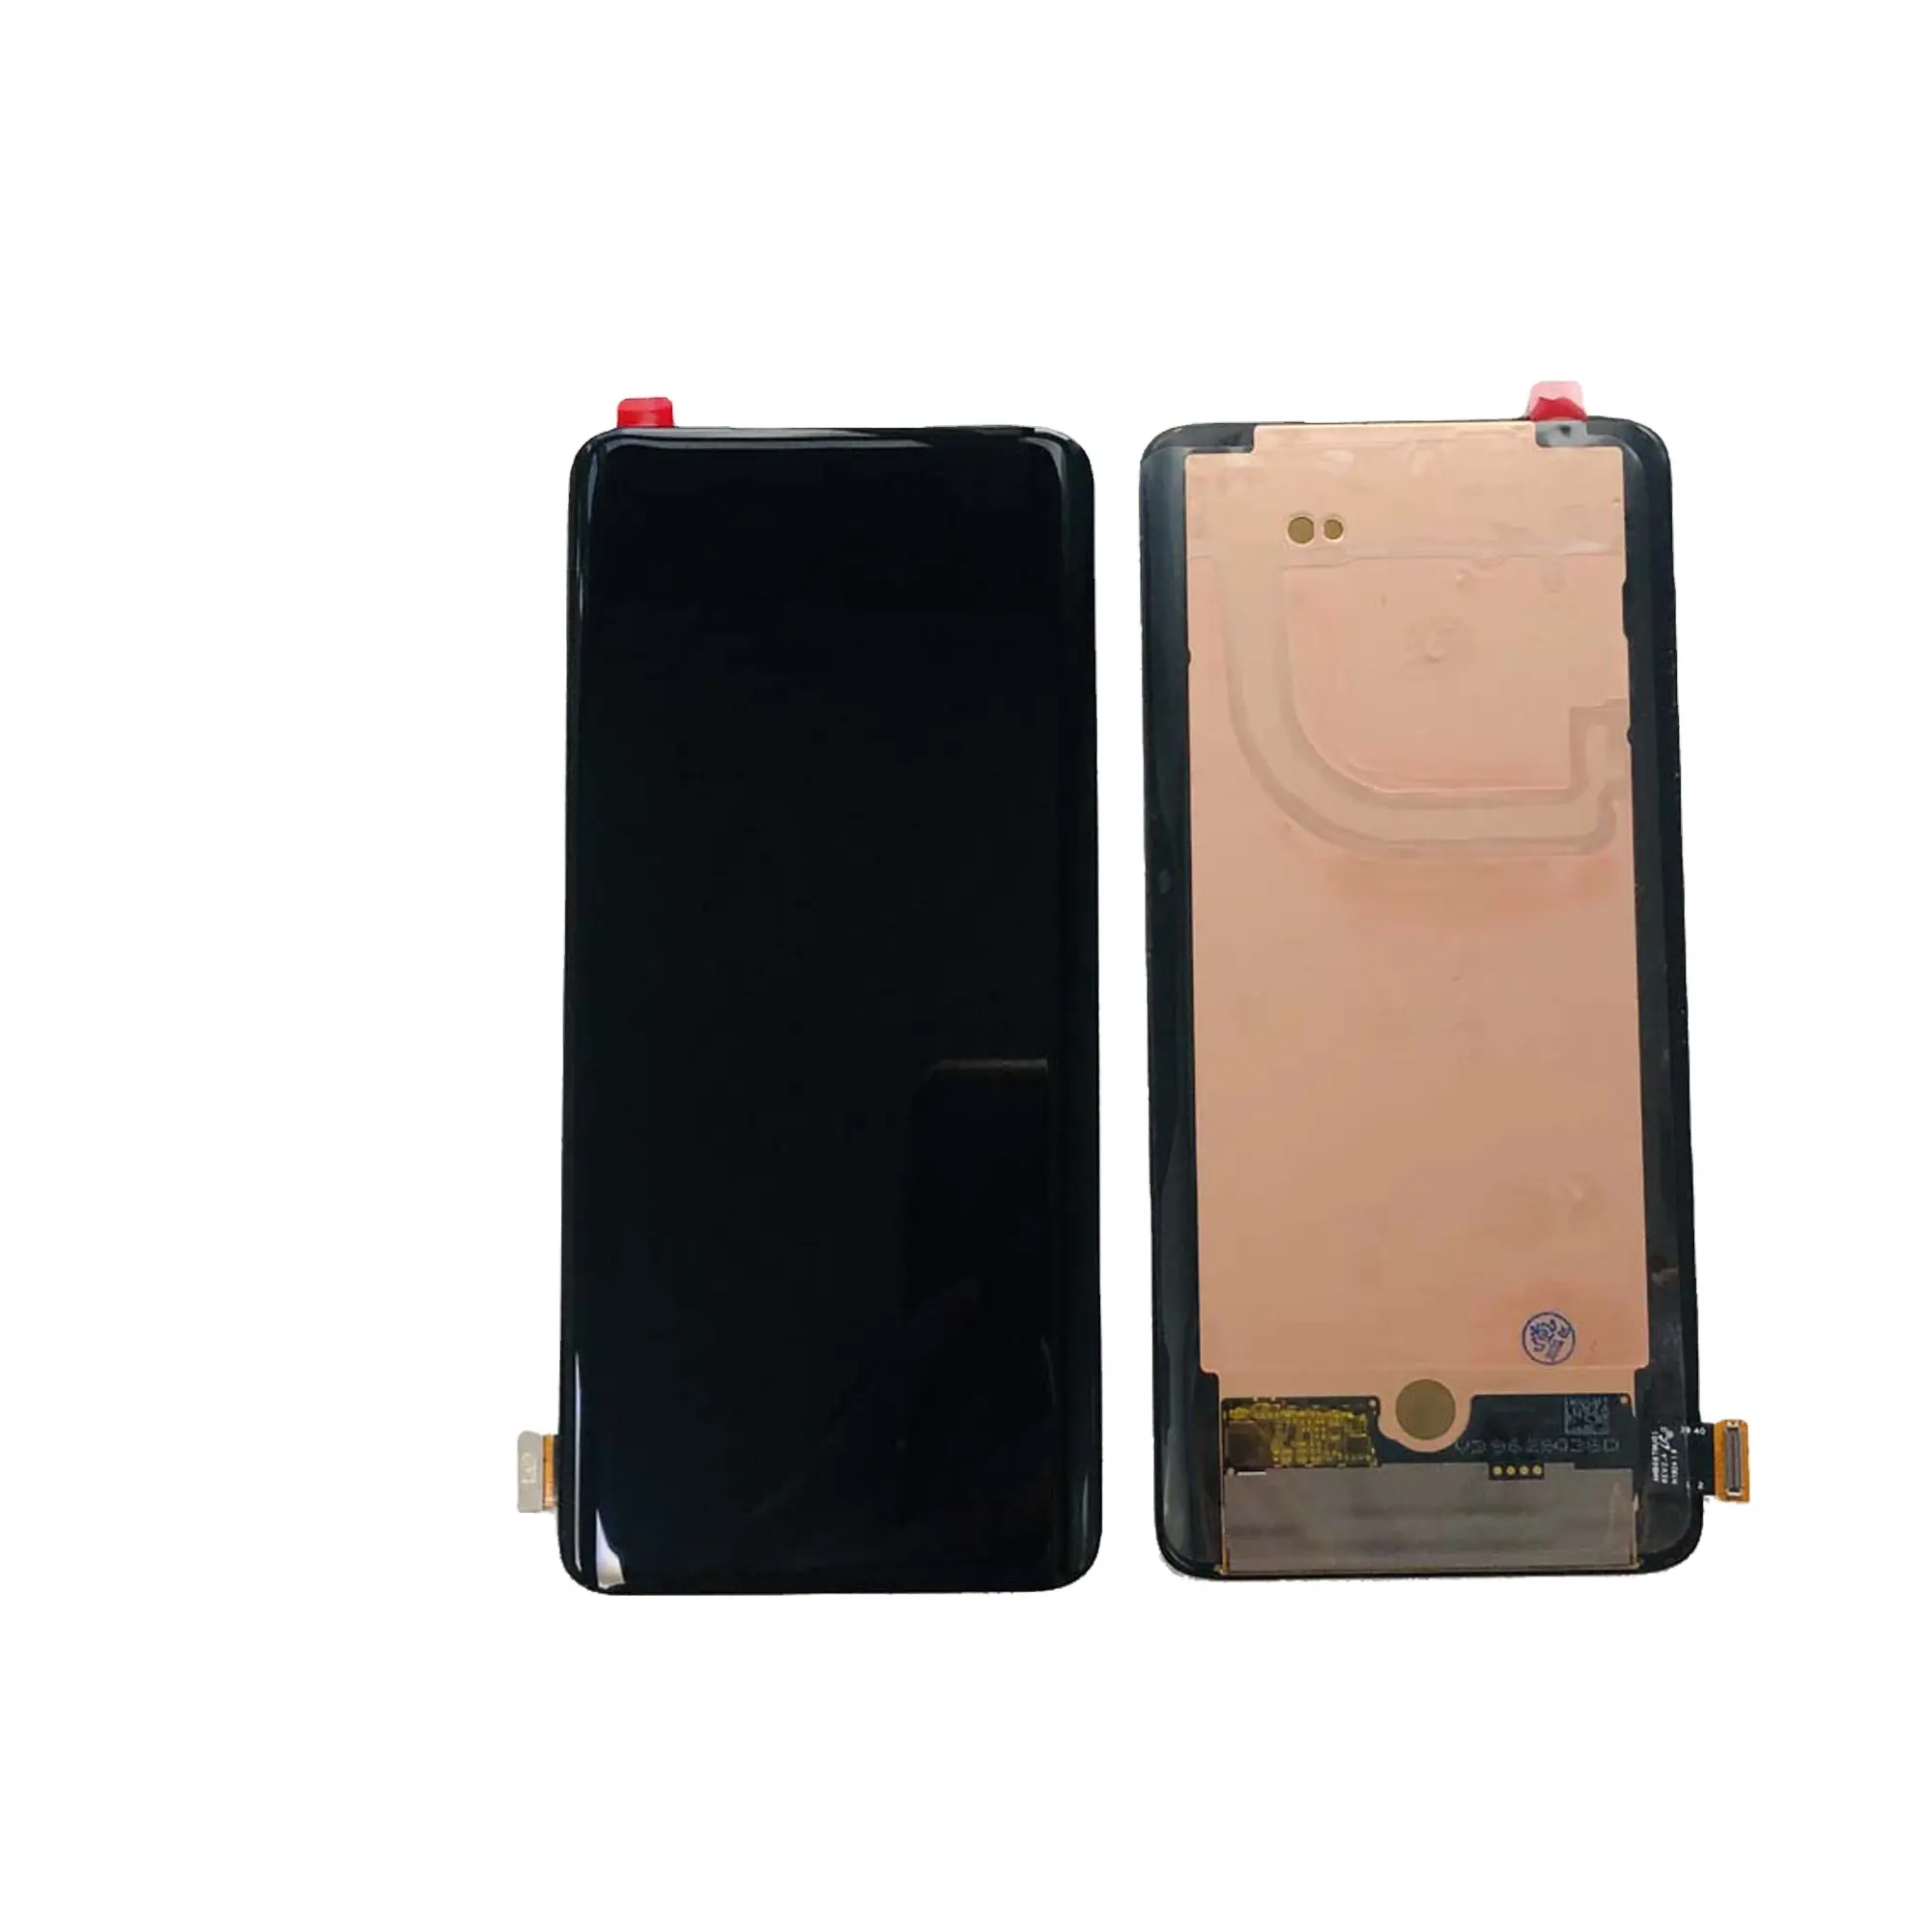 6.67 "Original Super Amoled Tested For OnePlus 7 Pro Display LCD Screen + Touch Panel Digitizer For Oneplus 7T Pro McLaren